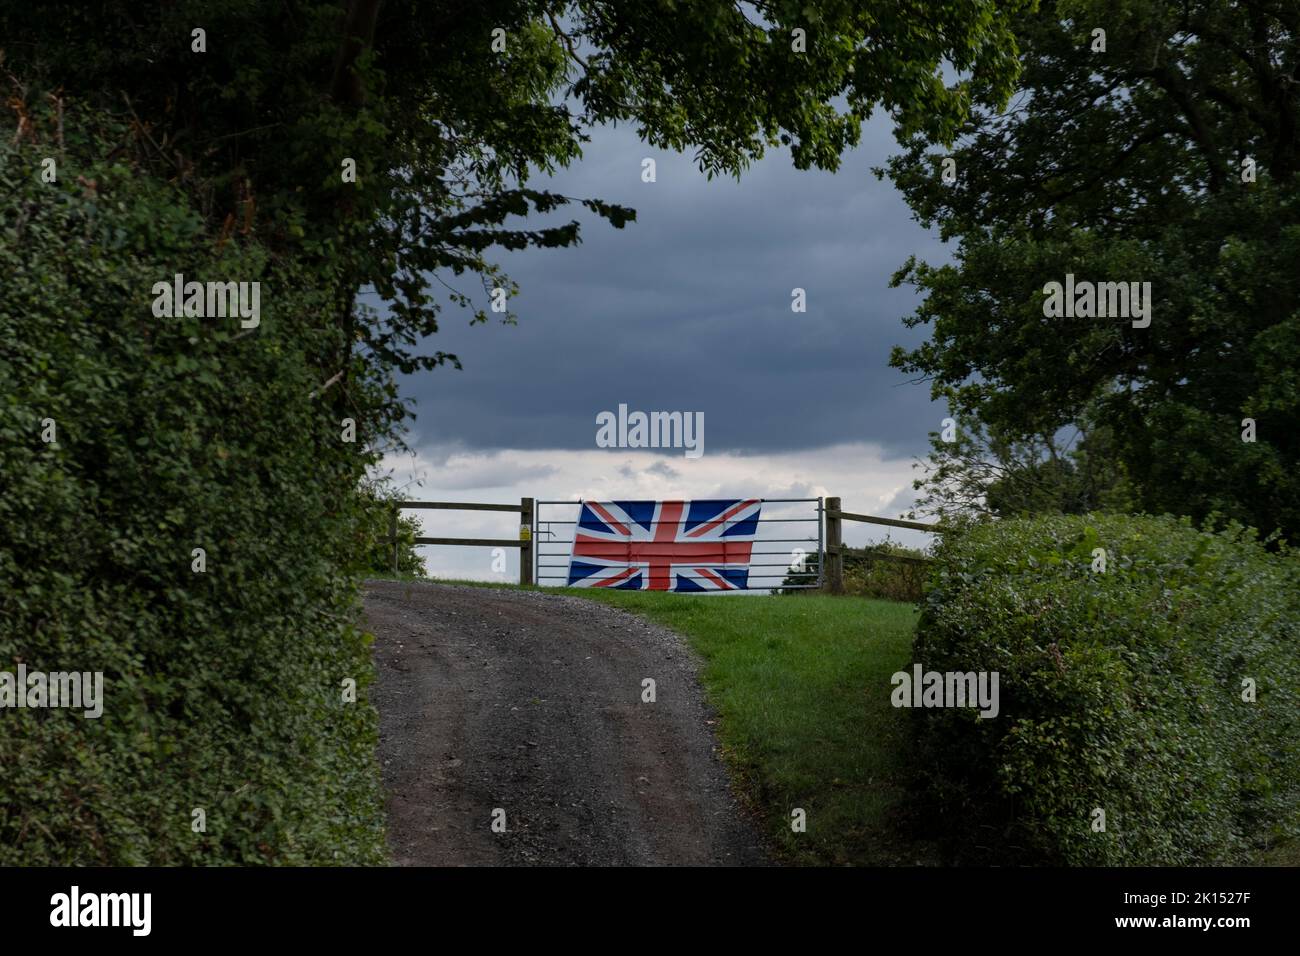 A Union Jack flag hangs in tribute from a farm gate in the Worcestershire countryside, UK. Stock Photo